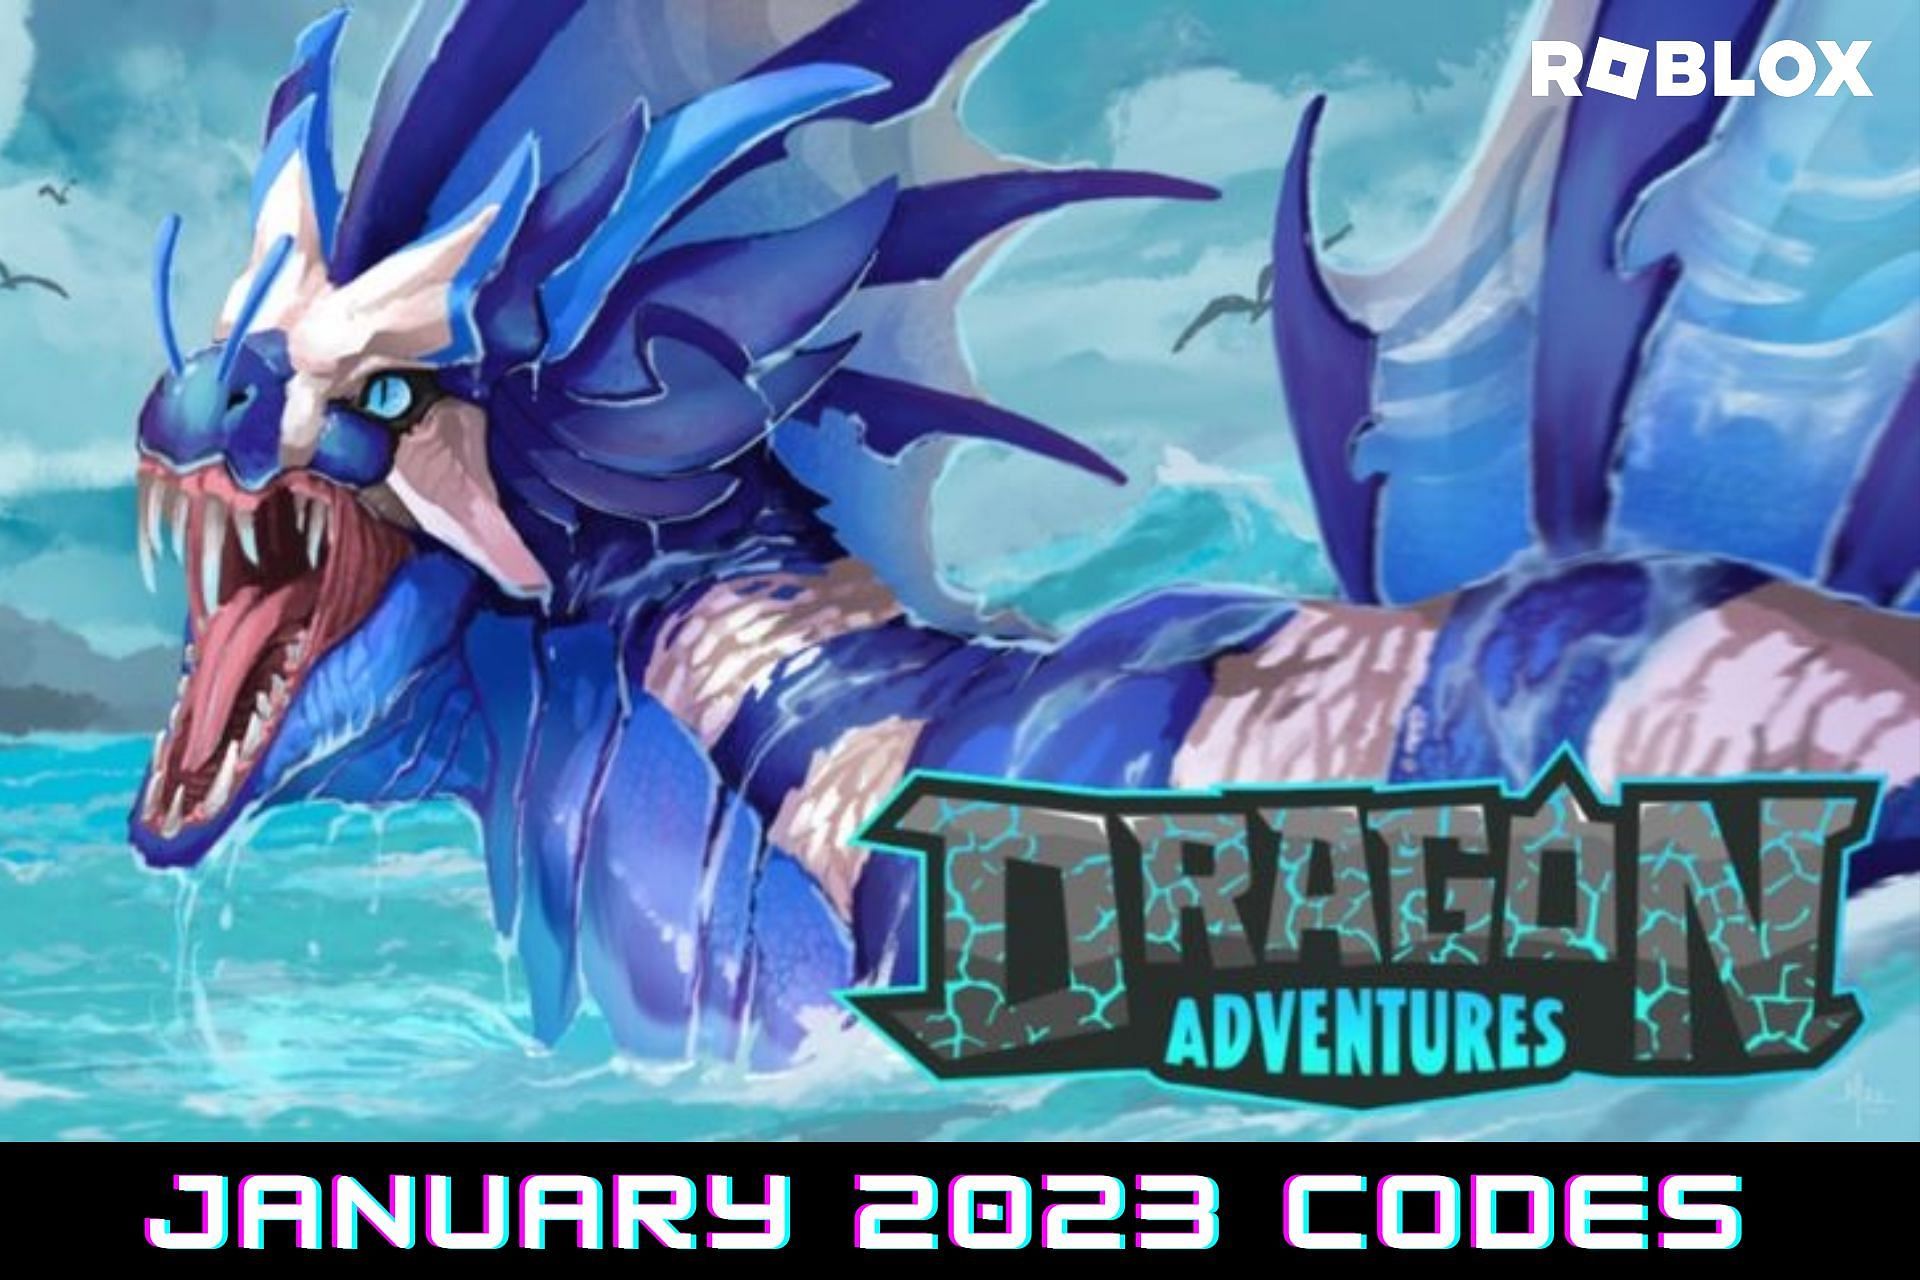 Roblox Dragon Adventures codes for January 2023 Free potions